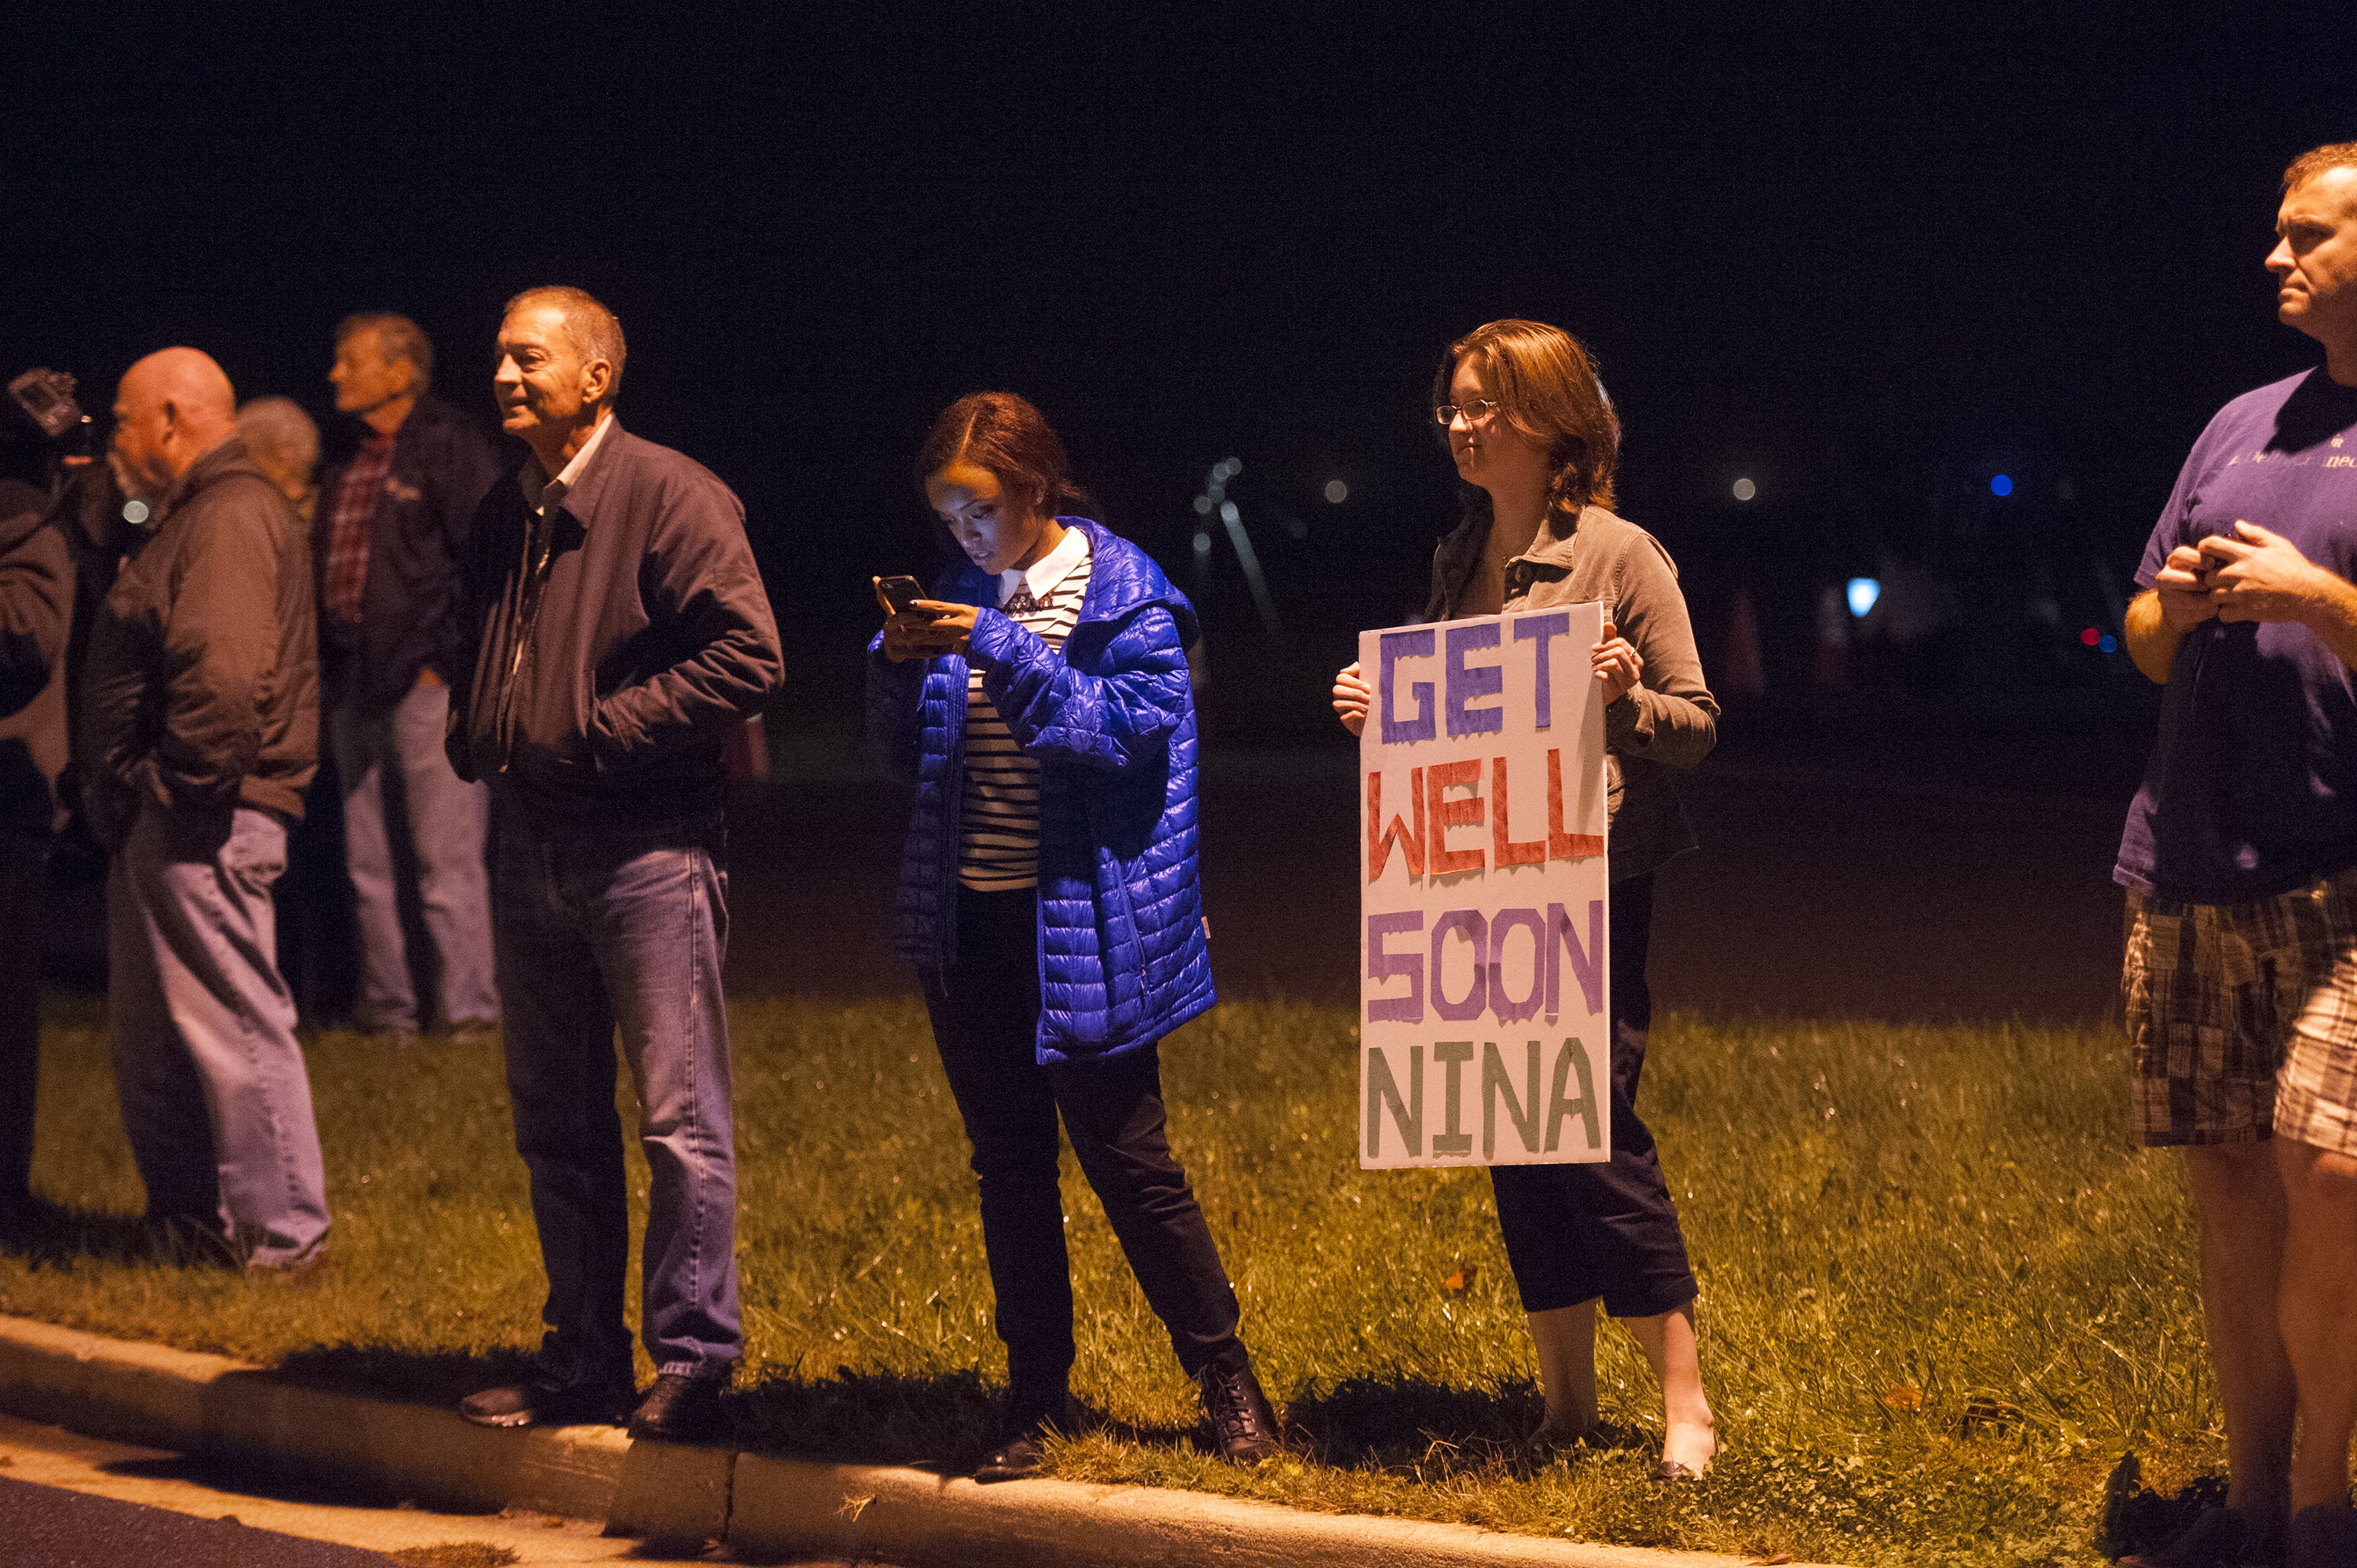 Ashley King of Walkersville came out to send a positive message to Nina Pham, a nurse who treated Thomas Duncan, the Liberian man, who died of Ebola,  who was flown into Frederick Airport and transferred to NIH to treat her now that she has Ebola October 16, 2014 in Frederick, Maryland. (The Washington Post/Getty Images)